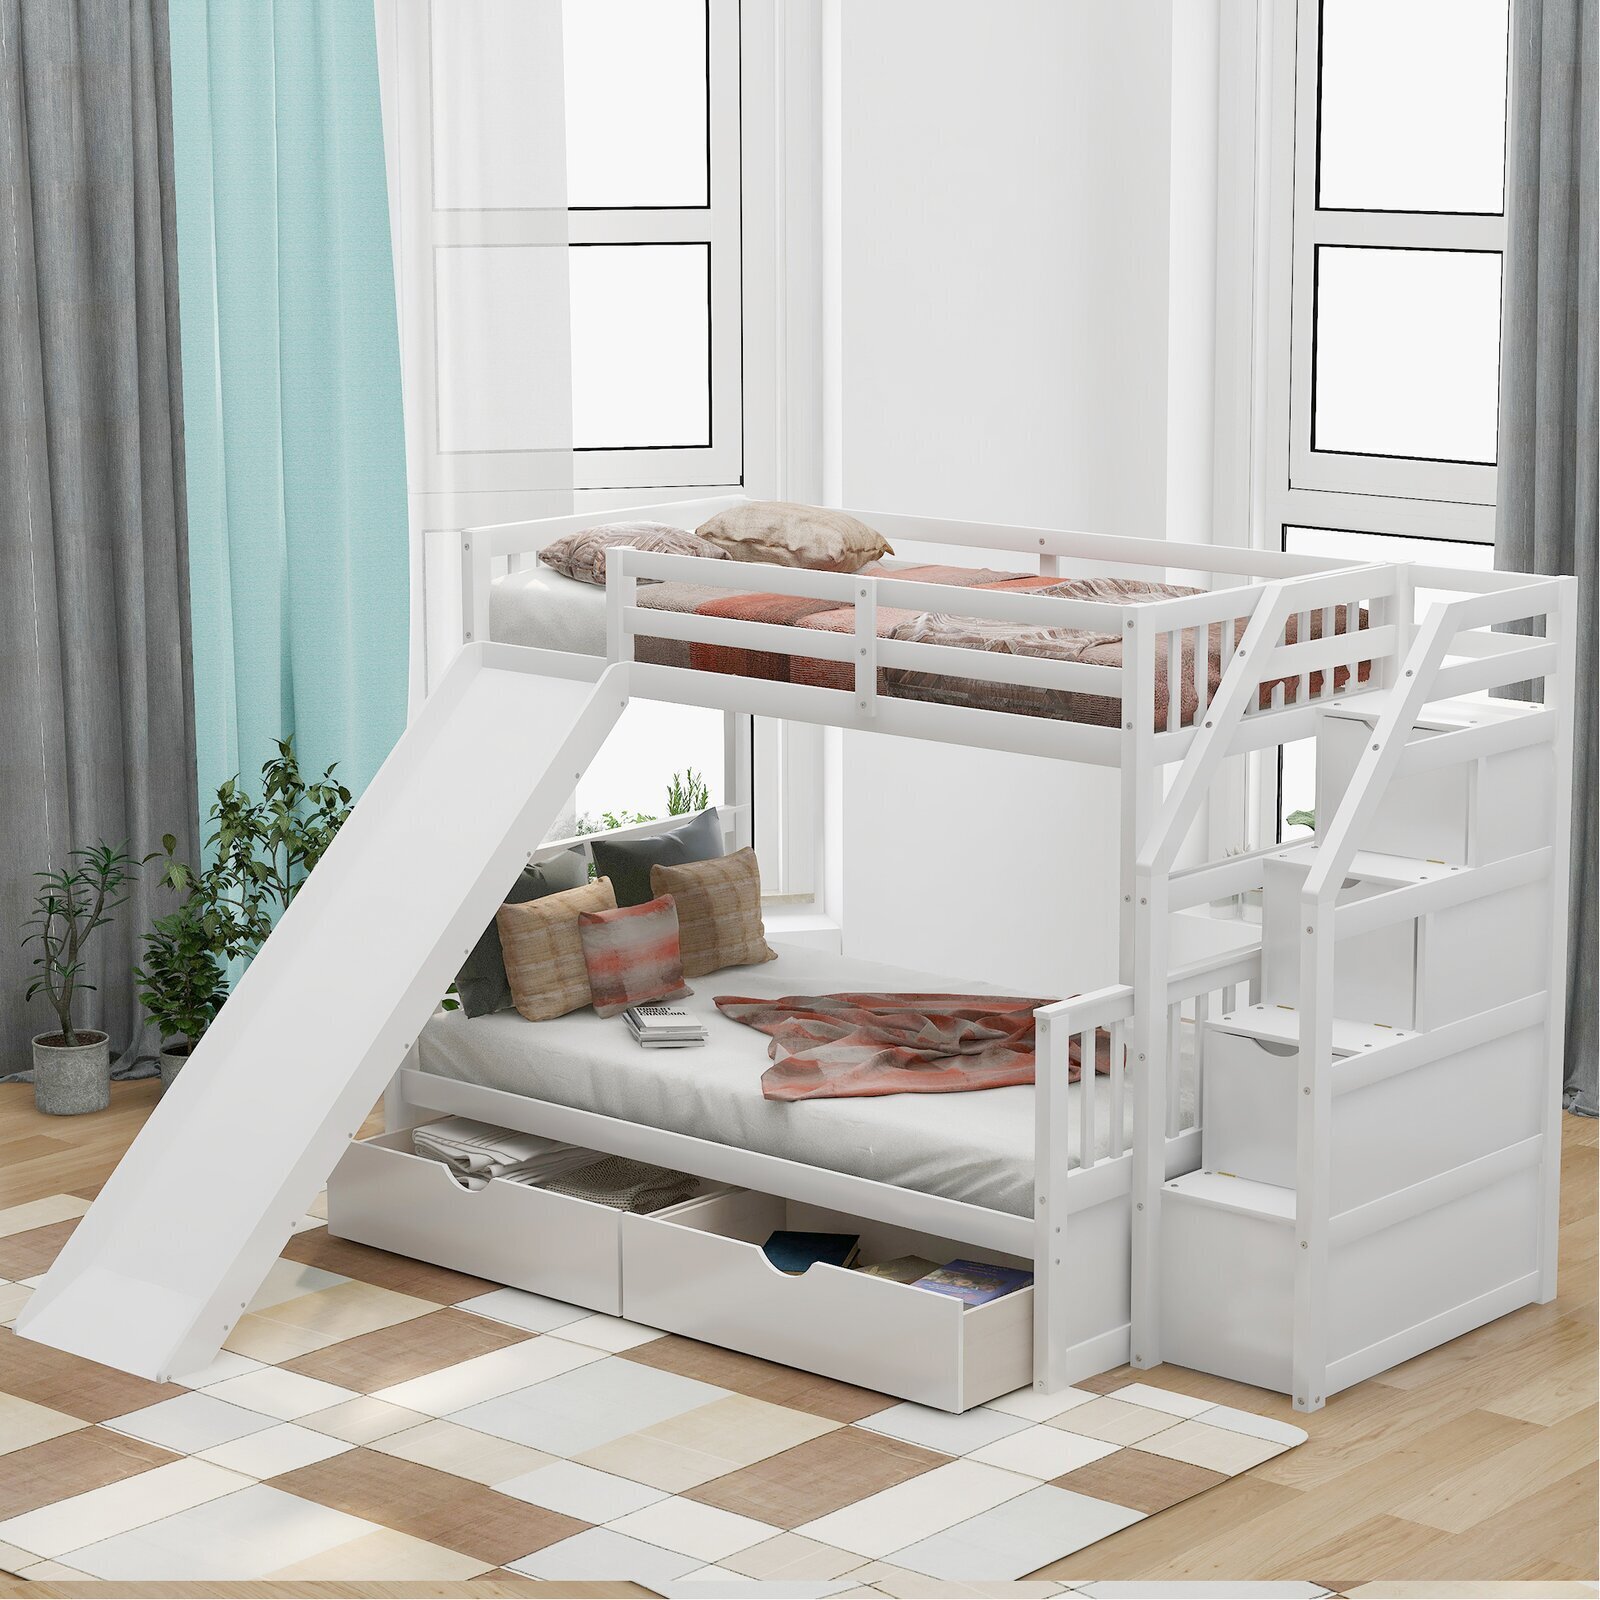 Slide Bunk Bed With Stairs